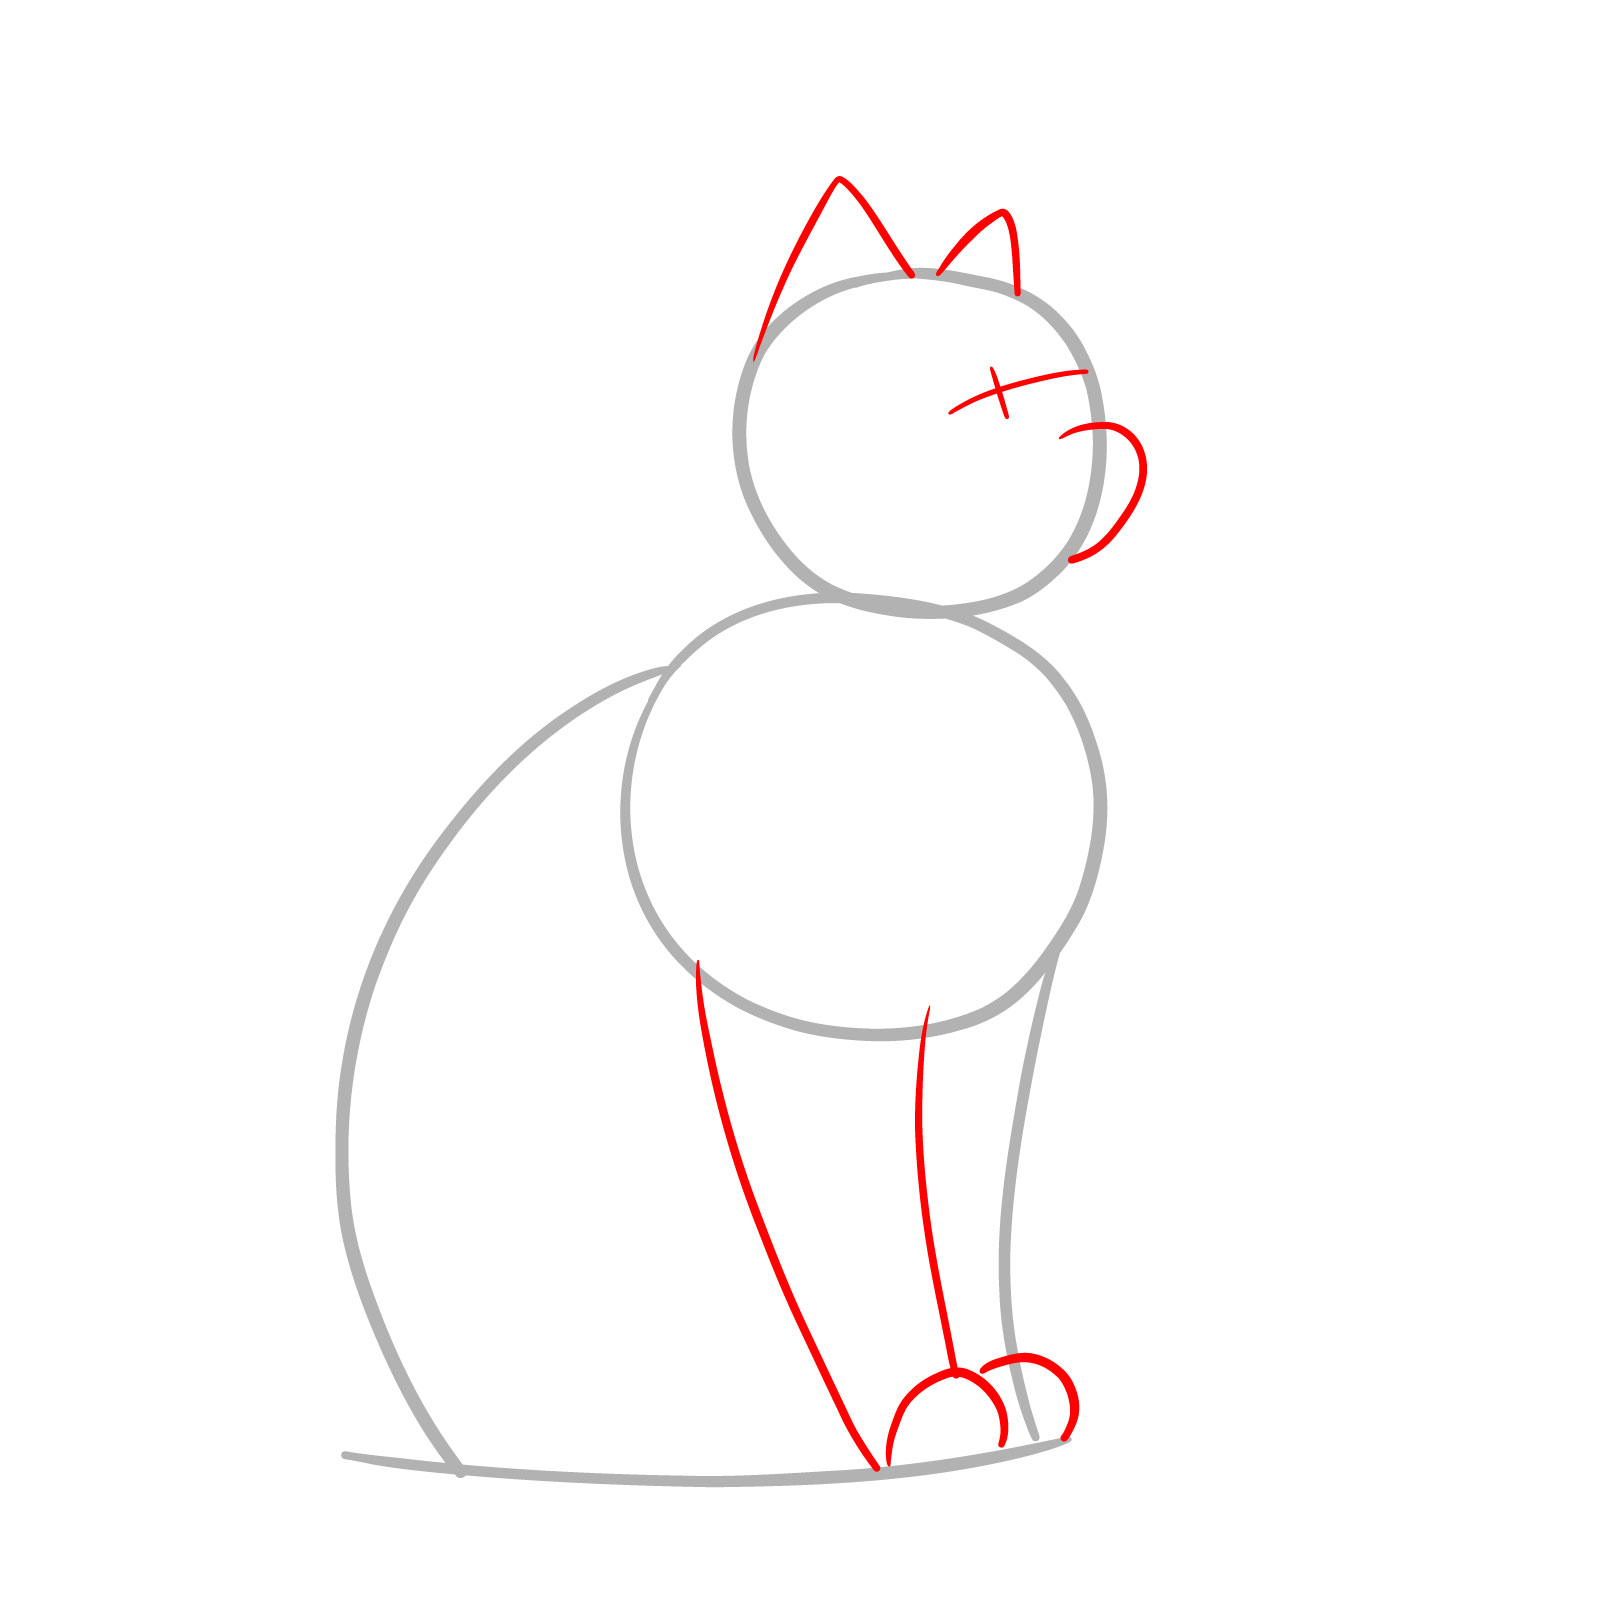 Adding facial guidelines and limbs to the cat sketch, with indications for eyes, muzzle, ears, and front paws - step 02